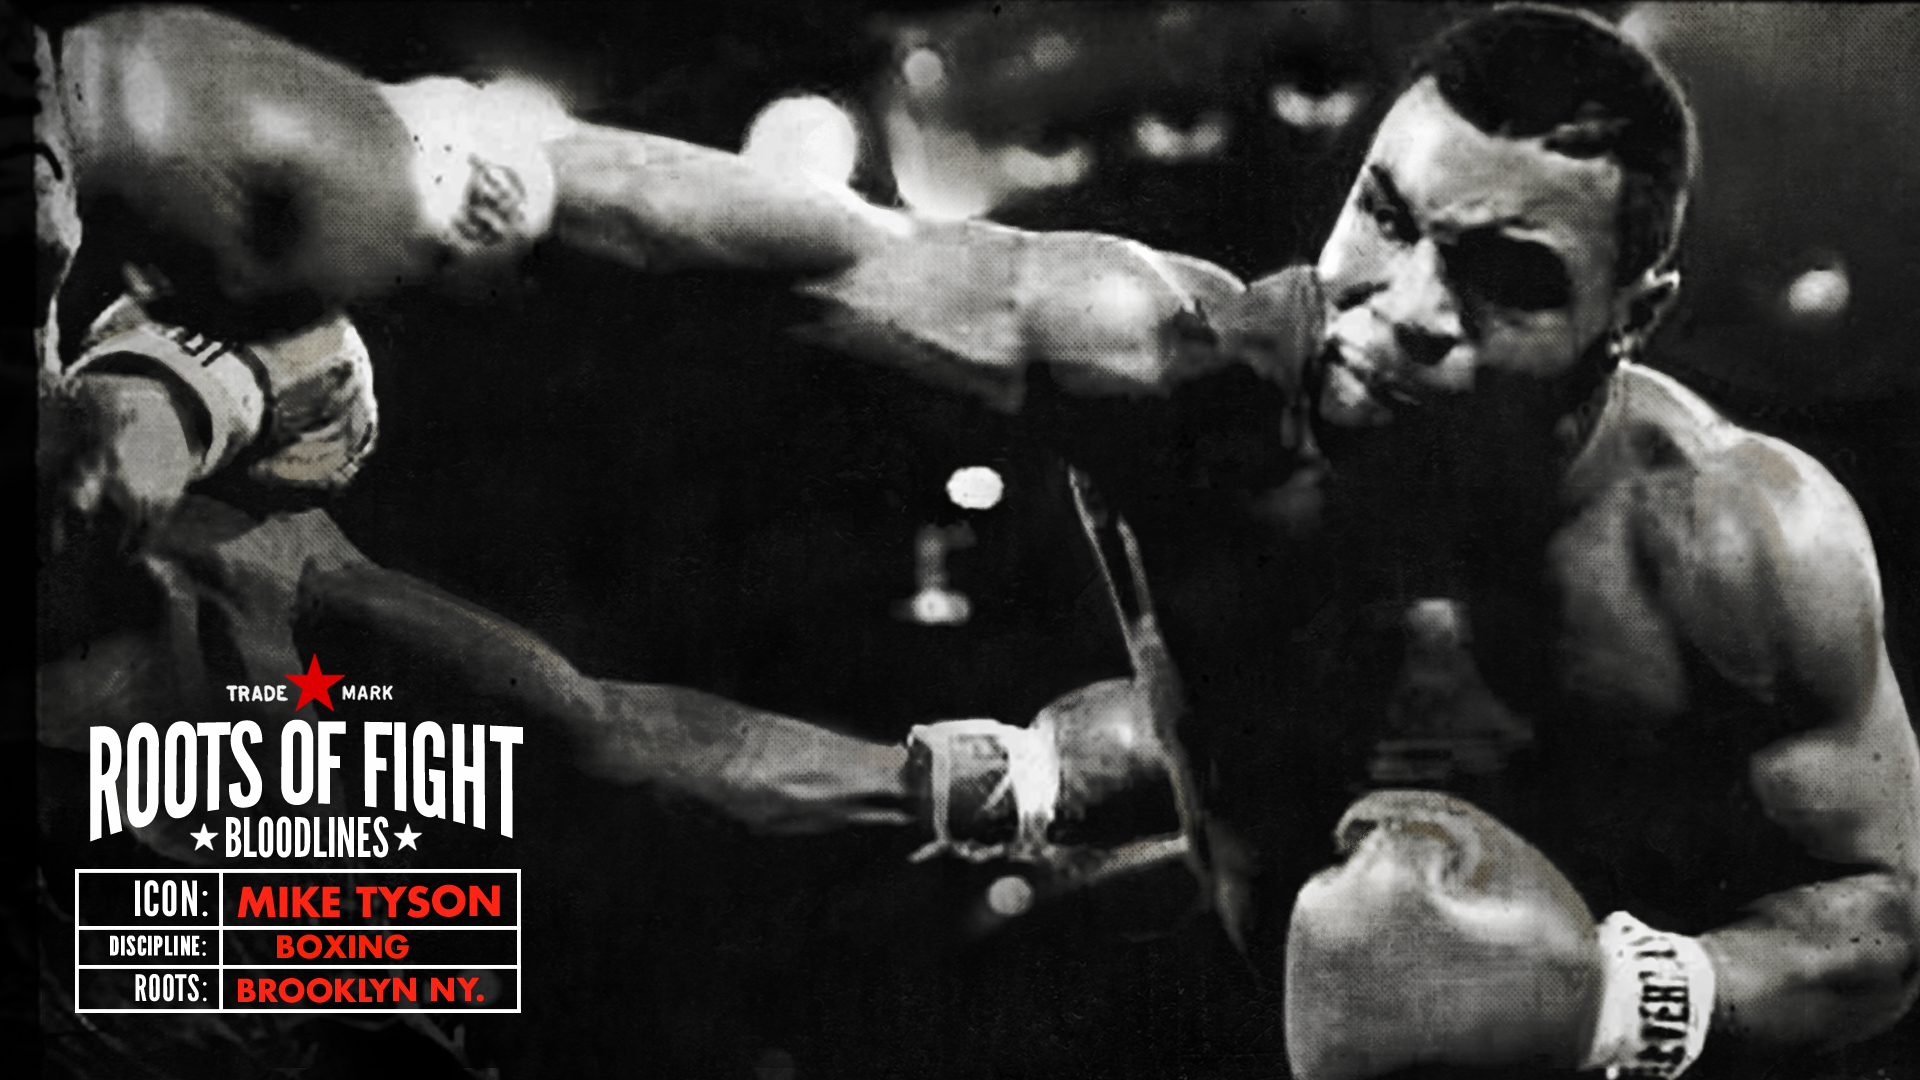 Iron Mike Tyson Wallpaper And Image Pictures Photos